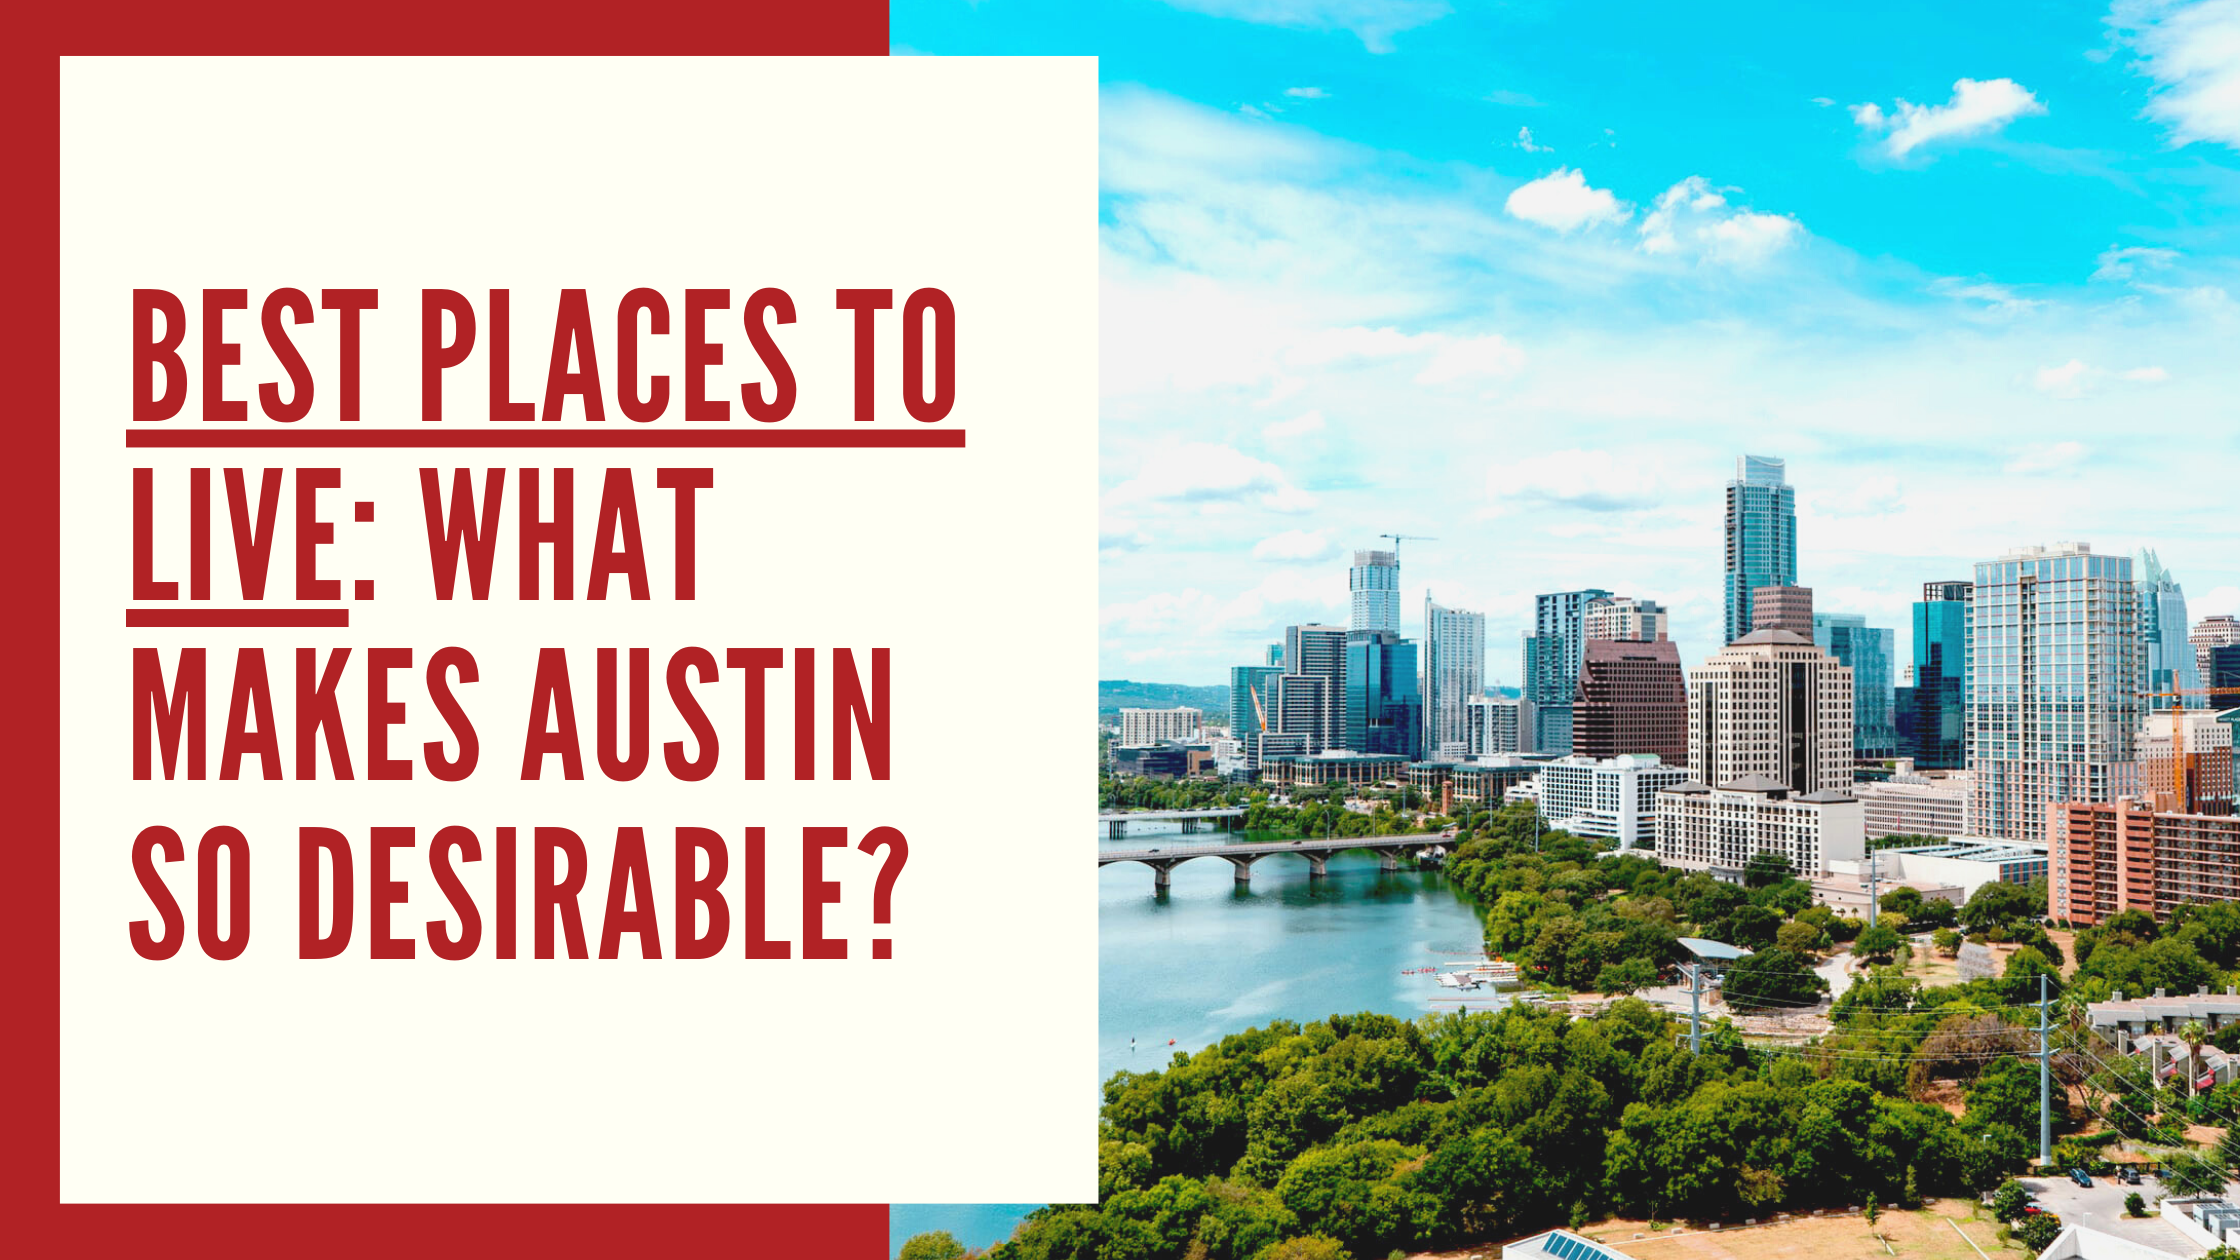 Living in Austin: Things to Know, Places to Live, & More